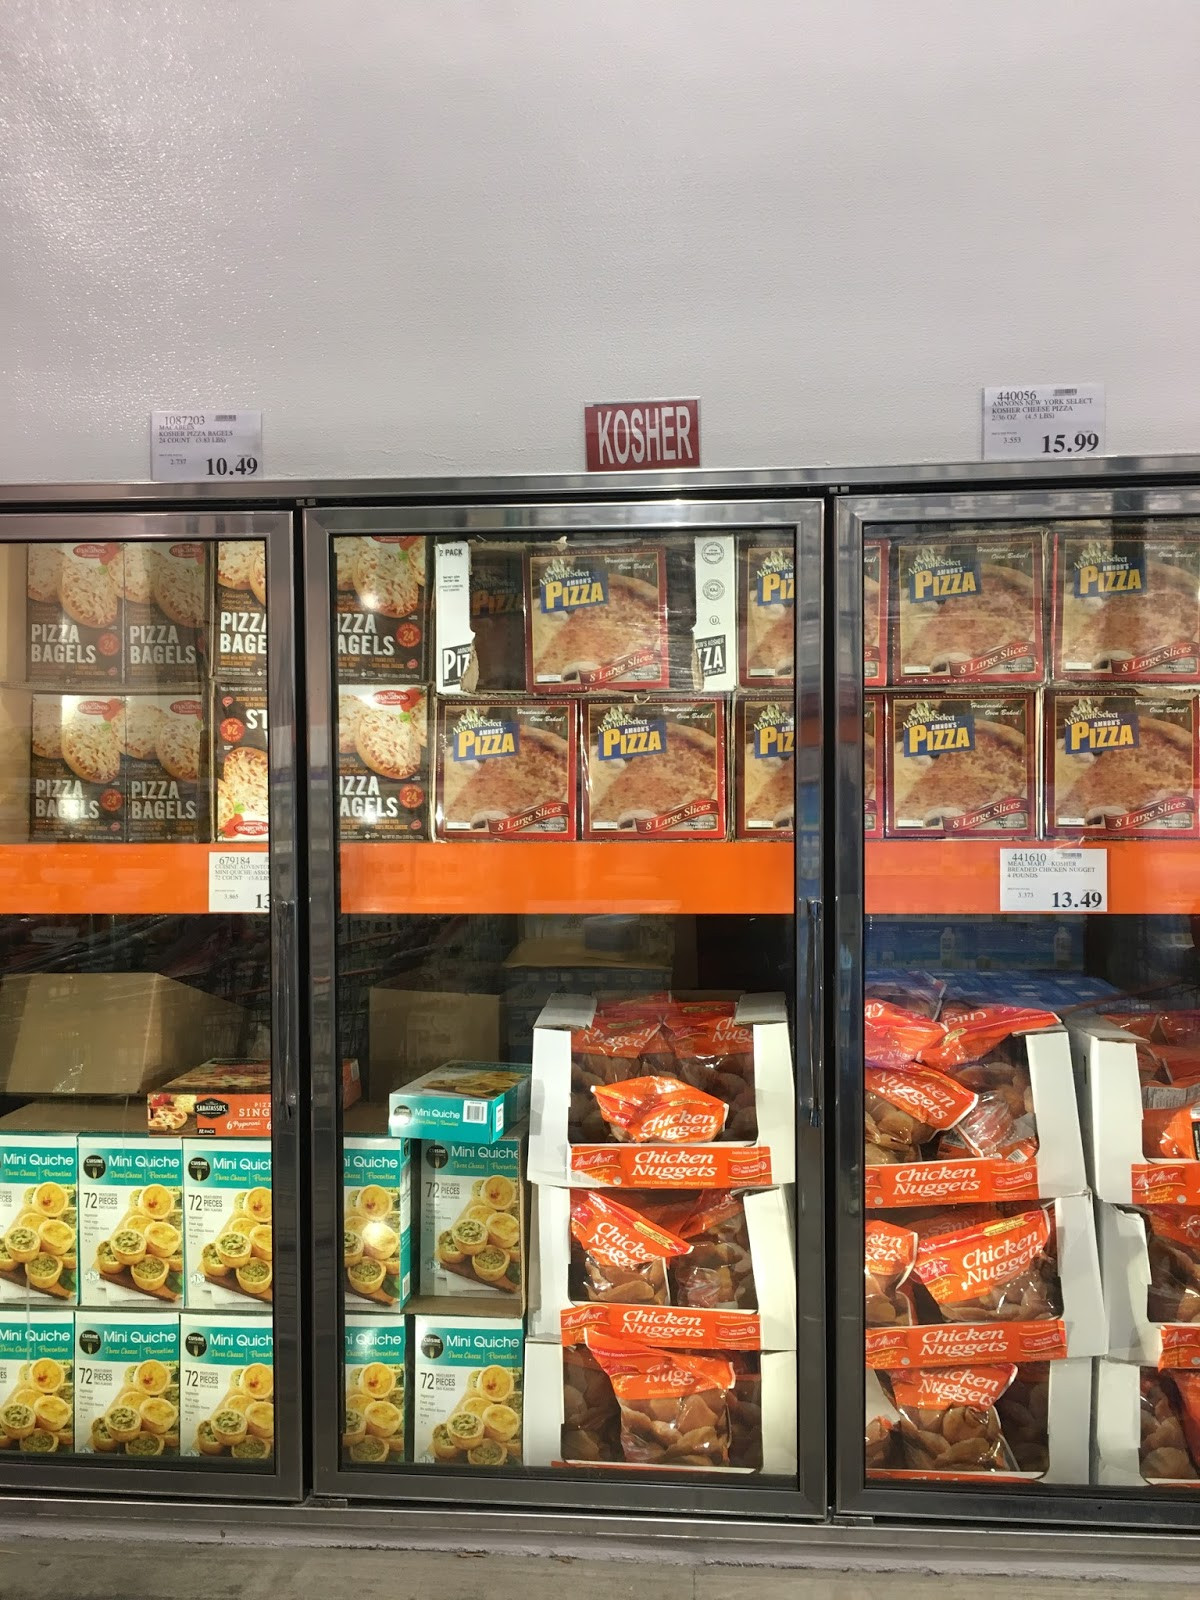 Passover Food Not Allowed
 the Costco Connoisseur Kosher and Kosher for Passover at